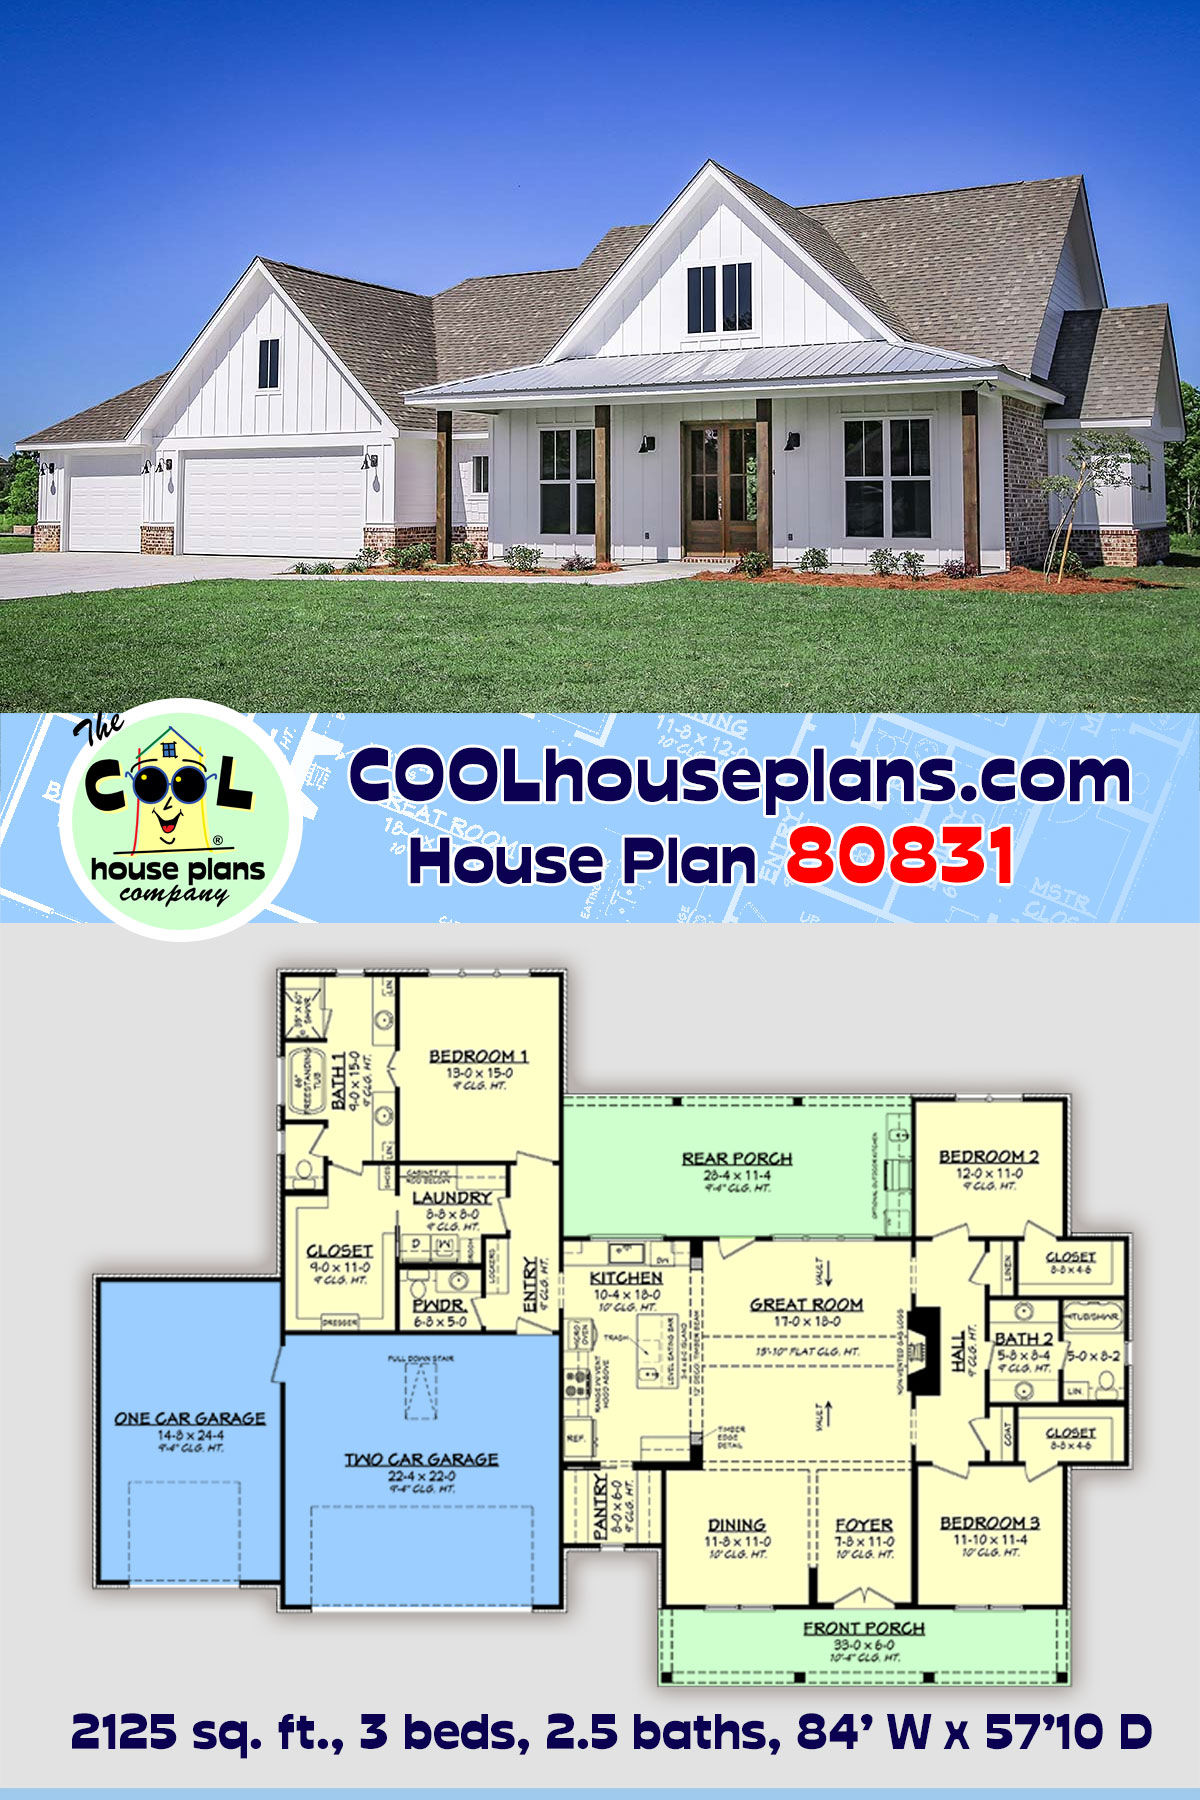 Cottage, Country, Farmhouse, Traditional House Plan 80831 with 3 Beds, 3 Baths, 3 Car Garage